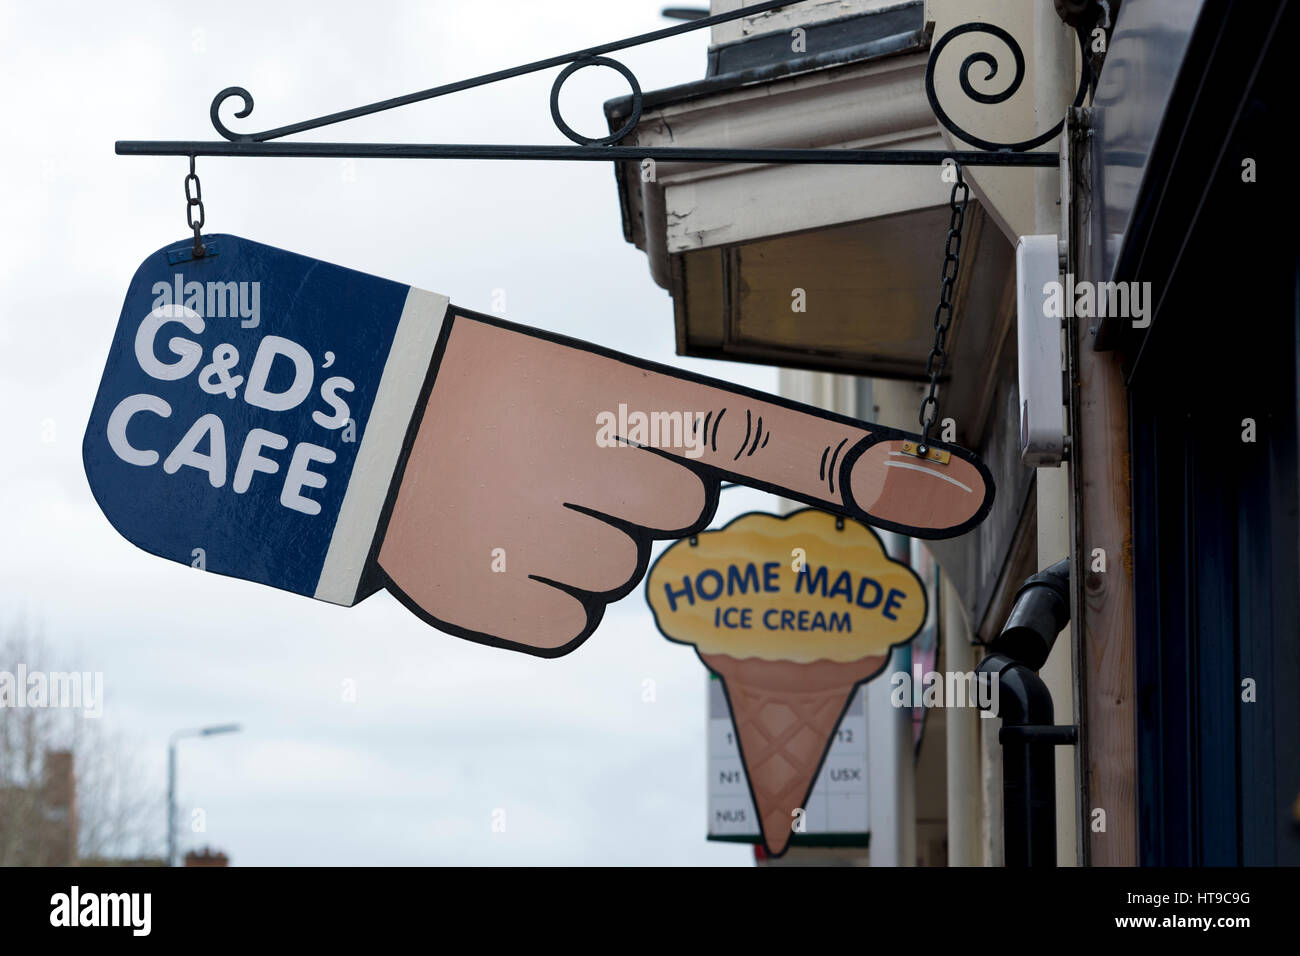 Cafe sign, Cowley Road, Oxford, UK Stock Photo